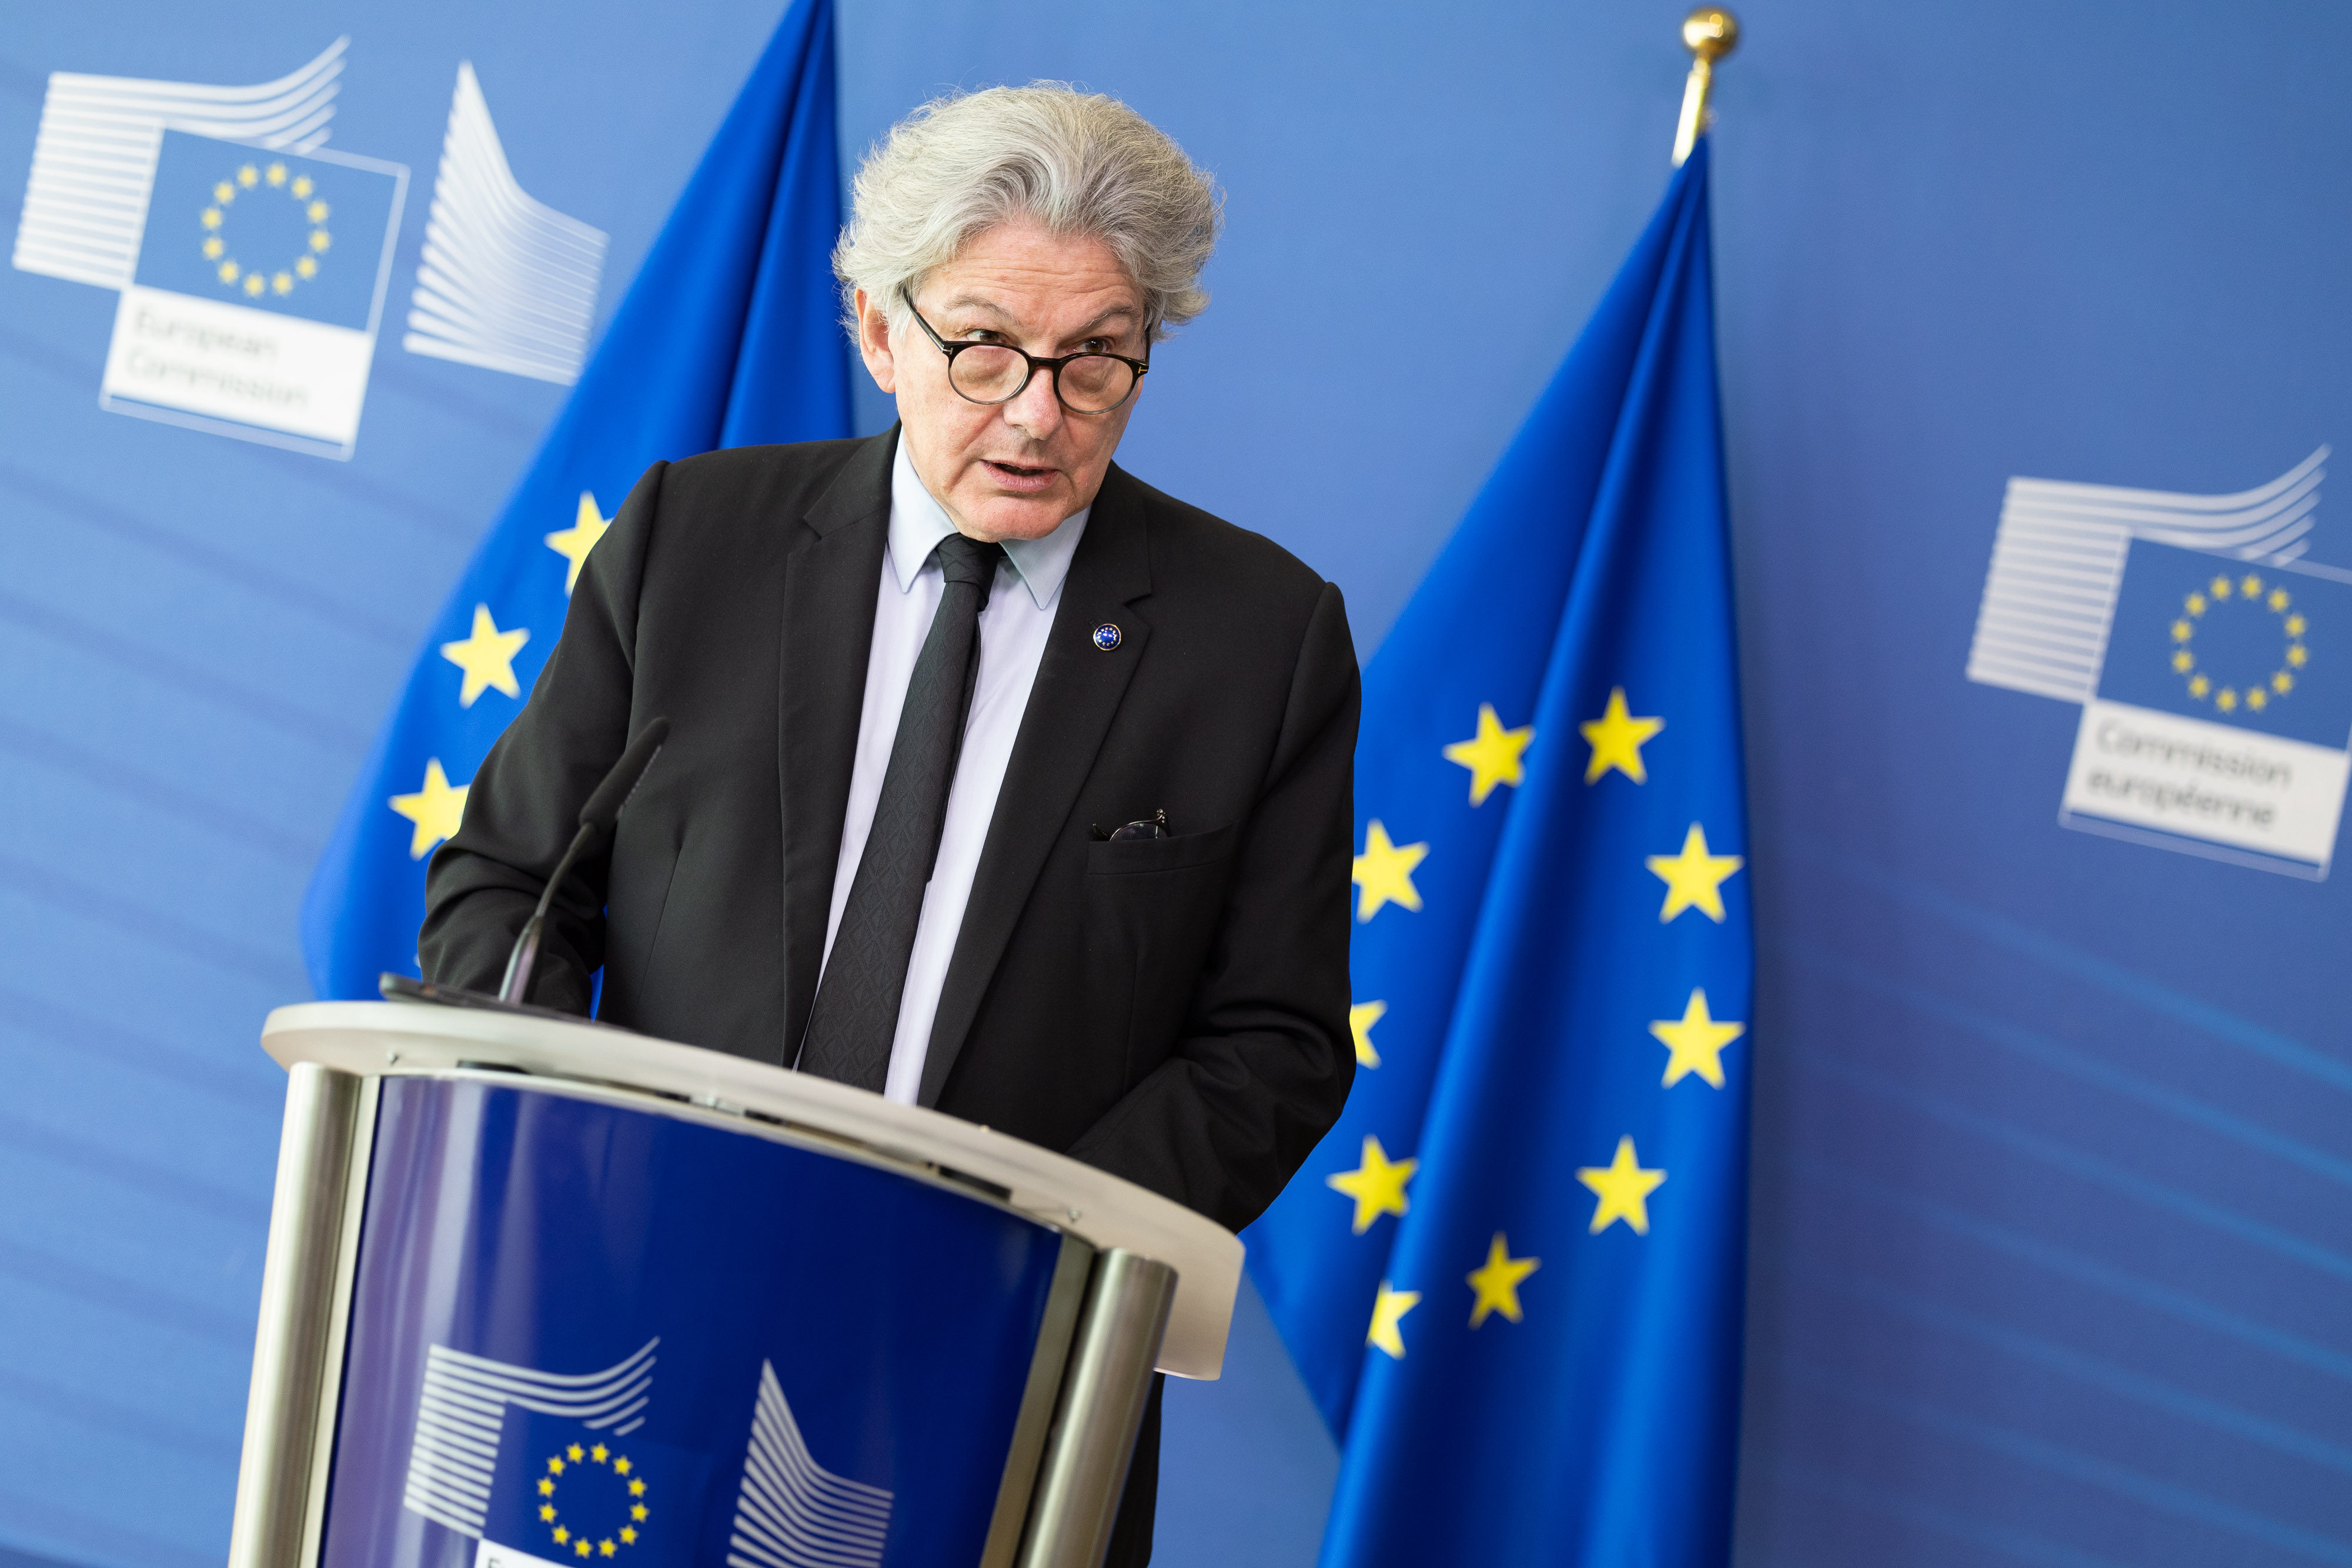 European Union industry chief Thierry Breton speaks during a press conference in Brussels, Belgium, on June 15, 2023. Photo: Christophe Licoppe/European Commission/dpa